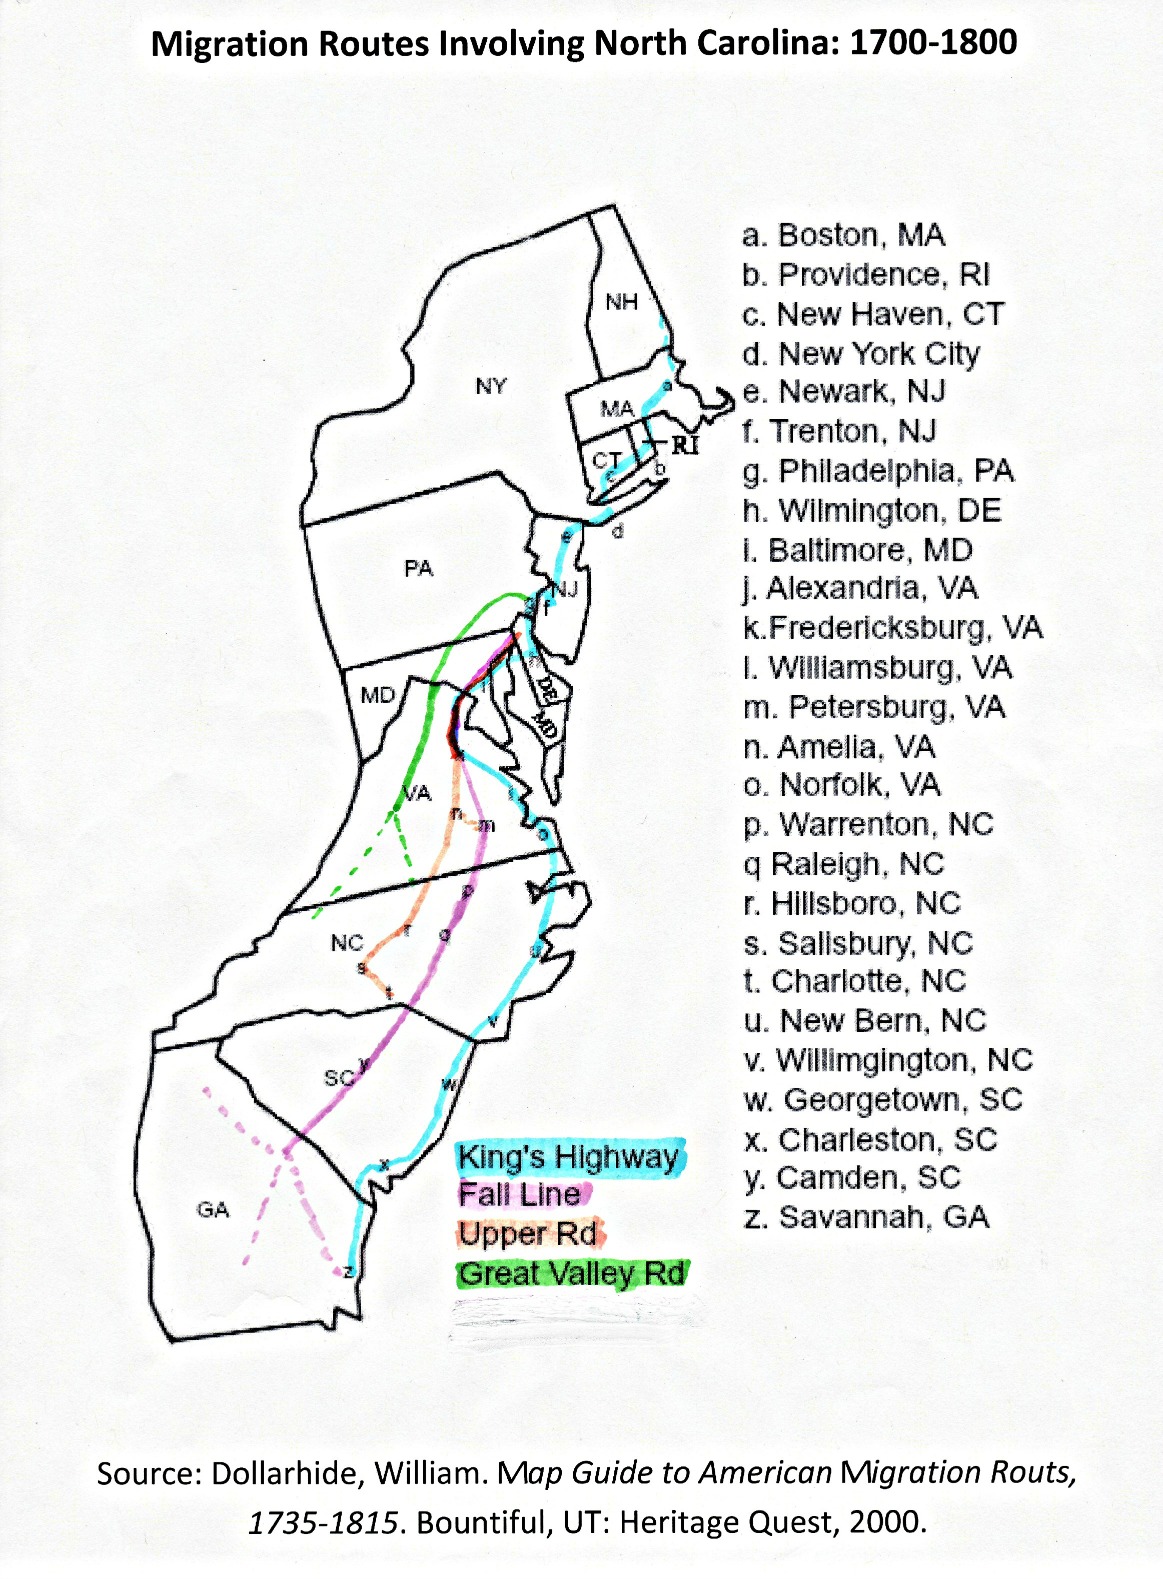 Map of major colonial migration routes in NC